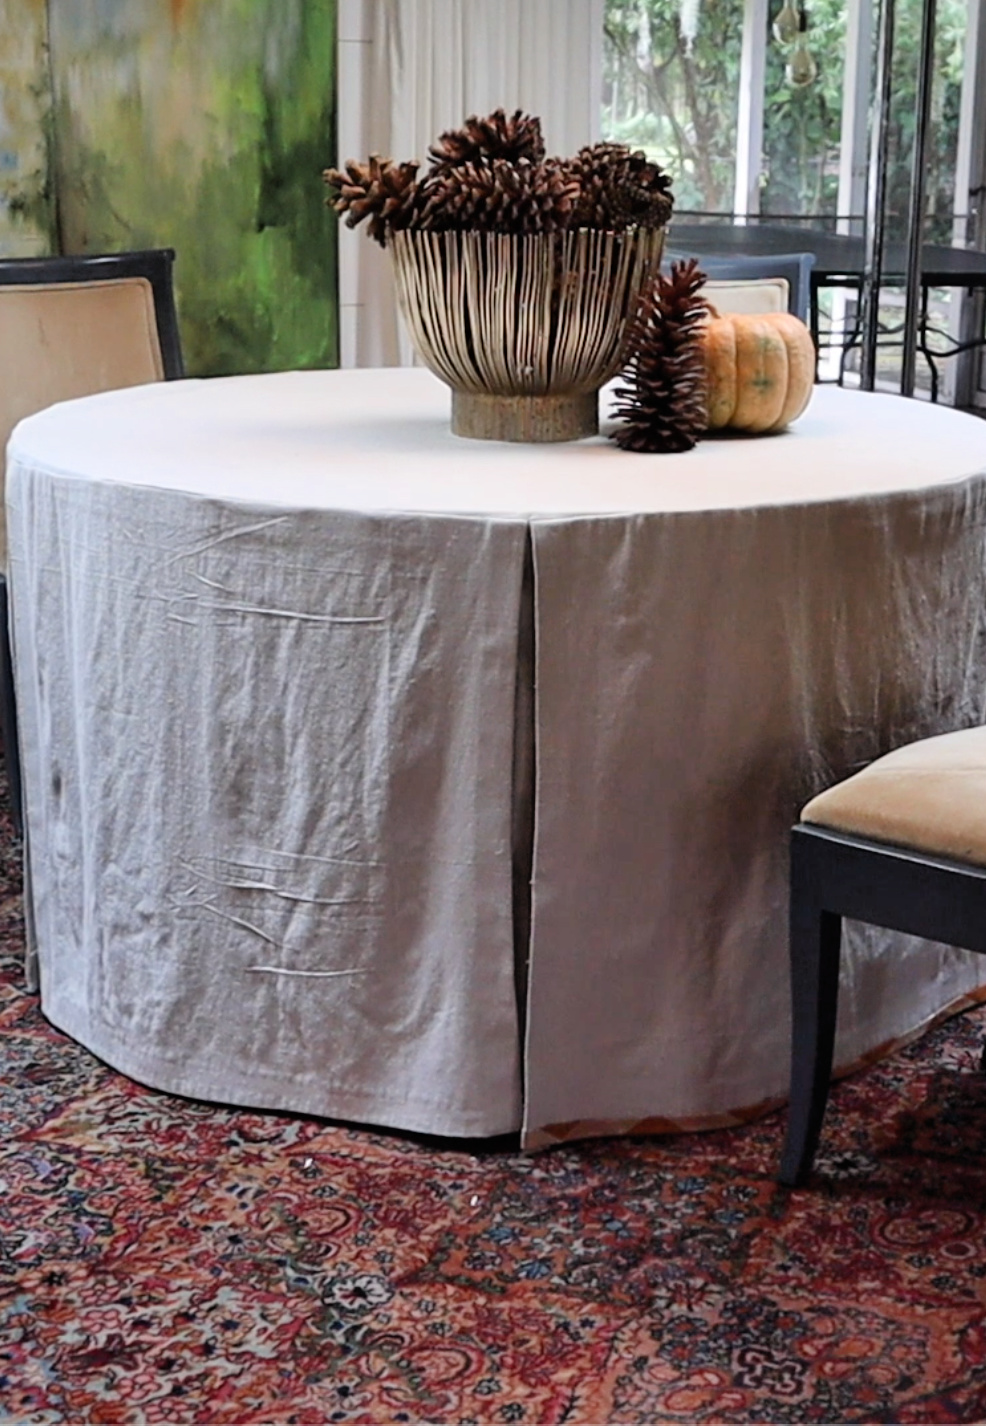 Diy Box Pleated Circle Table Skirt, How To Make A Box Pleated Round Table Skirt